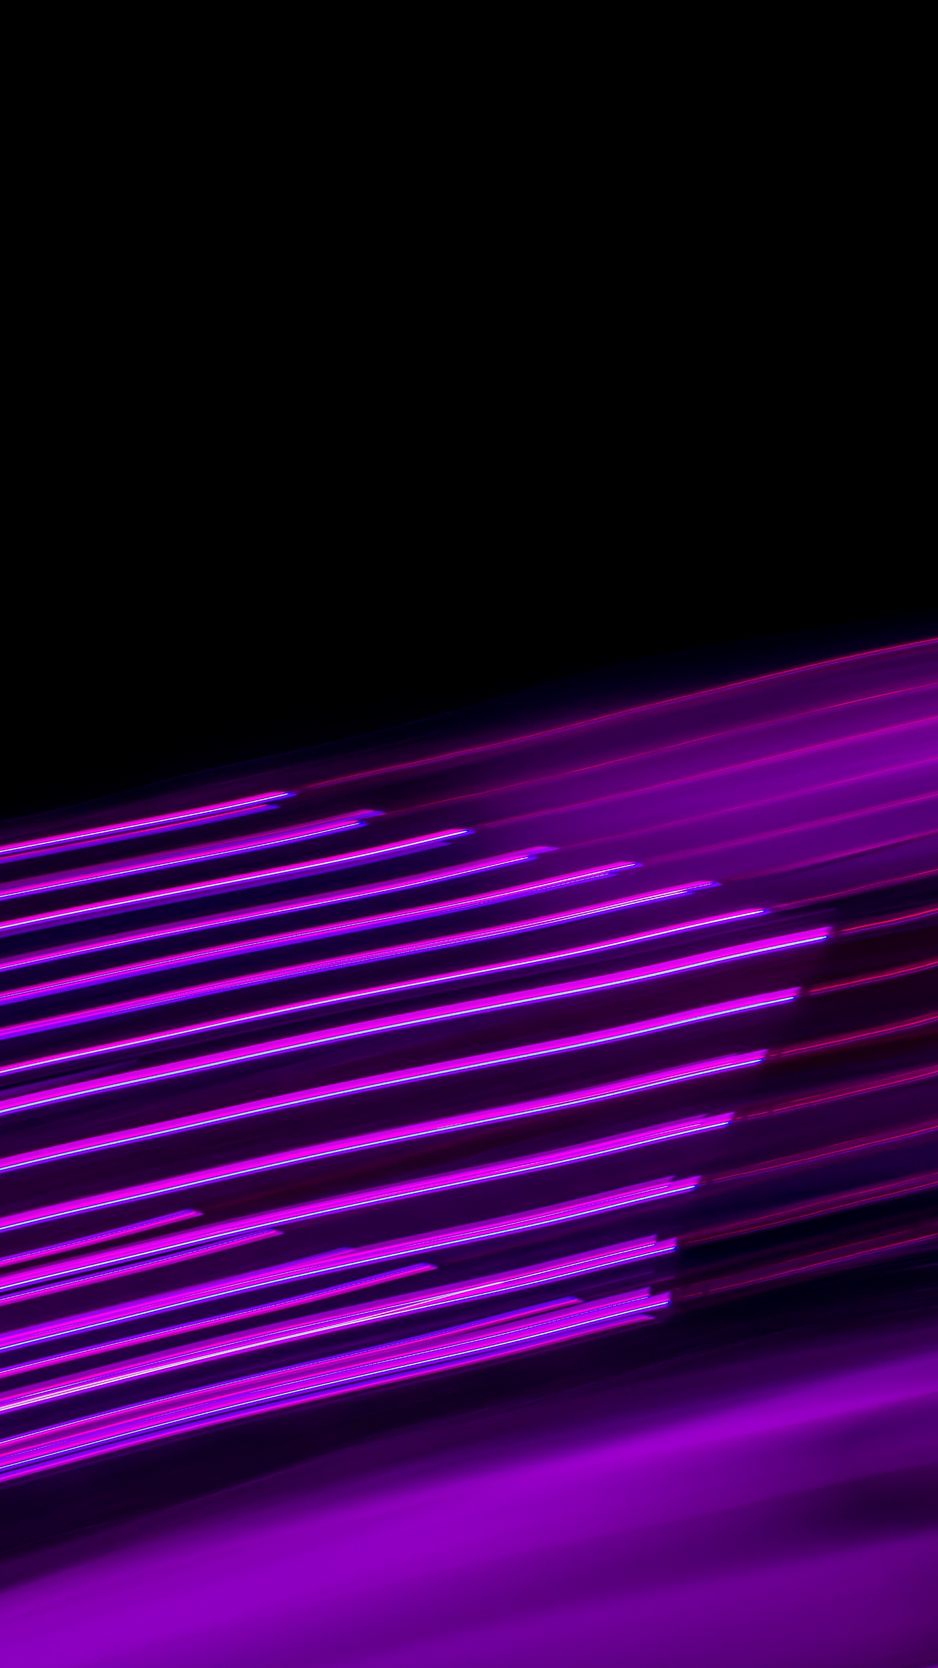 Admire the stunning design of the neon purple black striped wallpaper perfectly fit for your iPhone